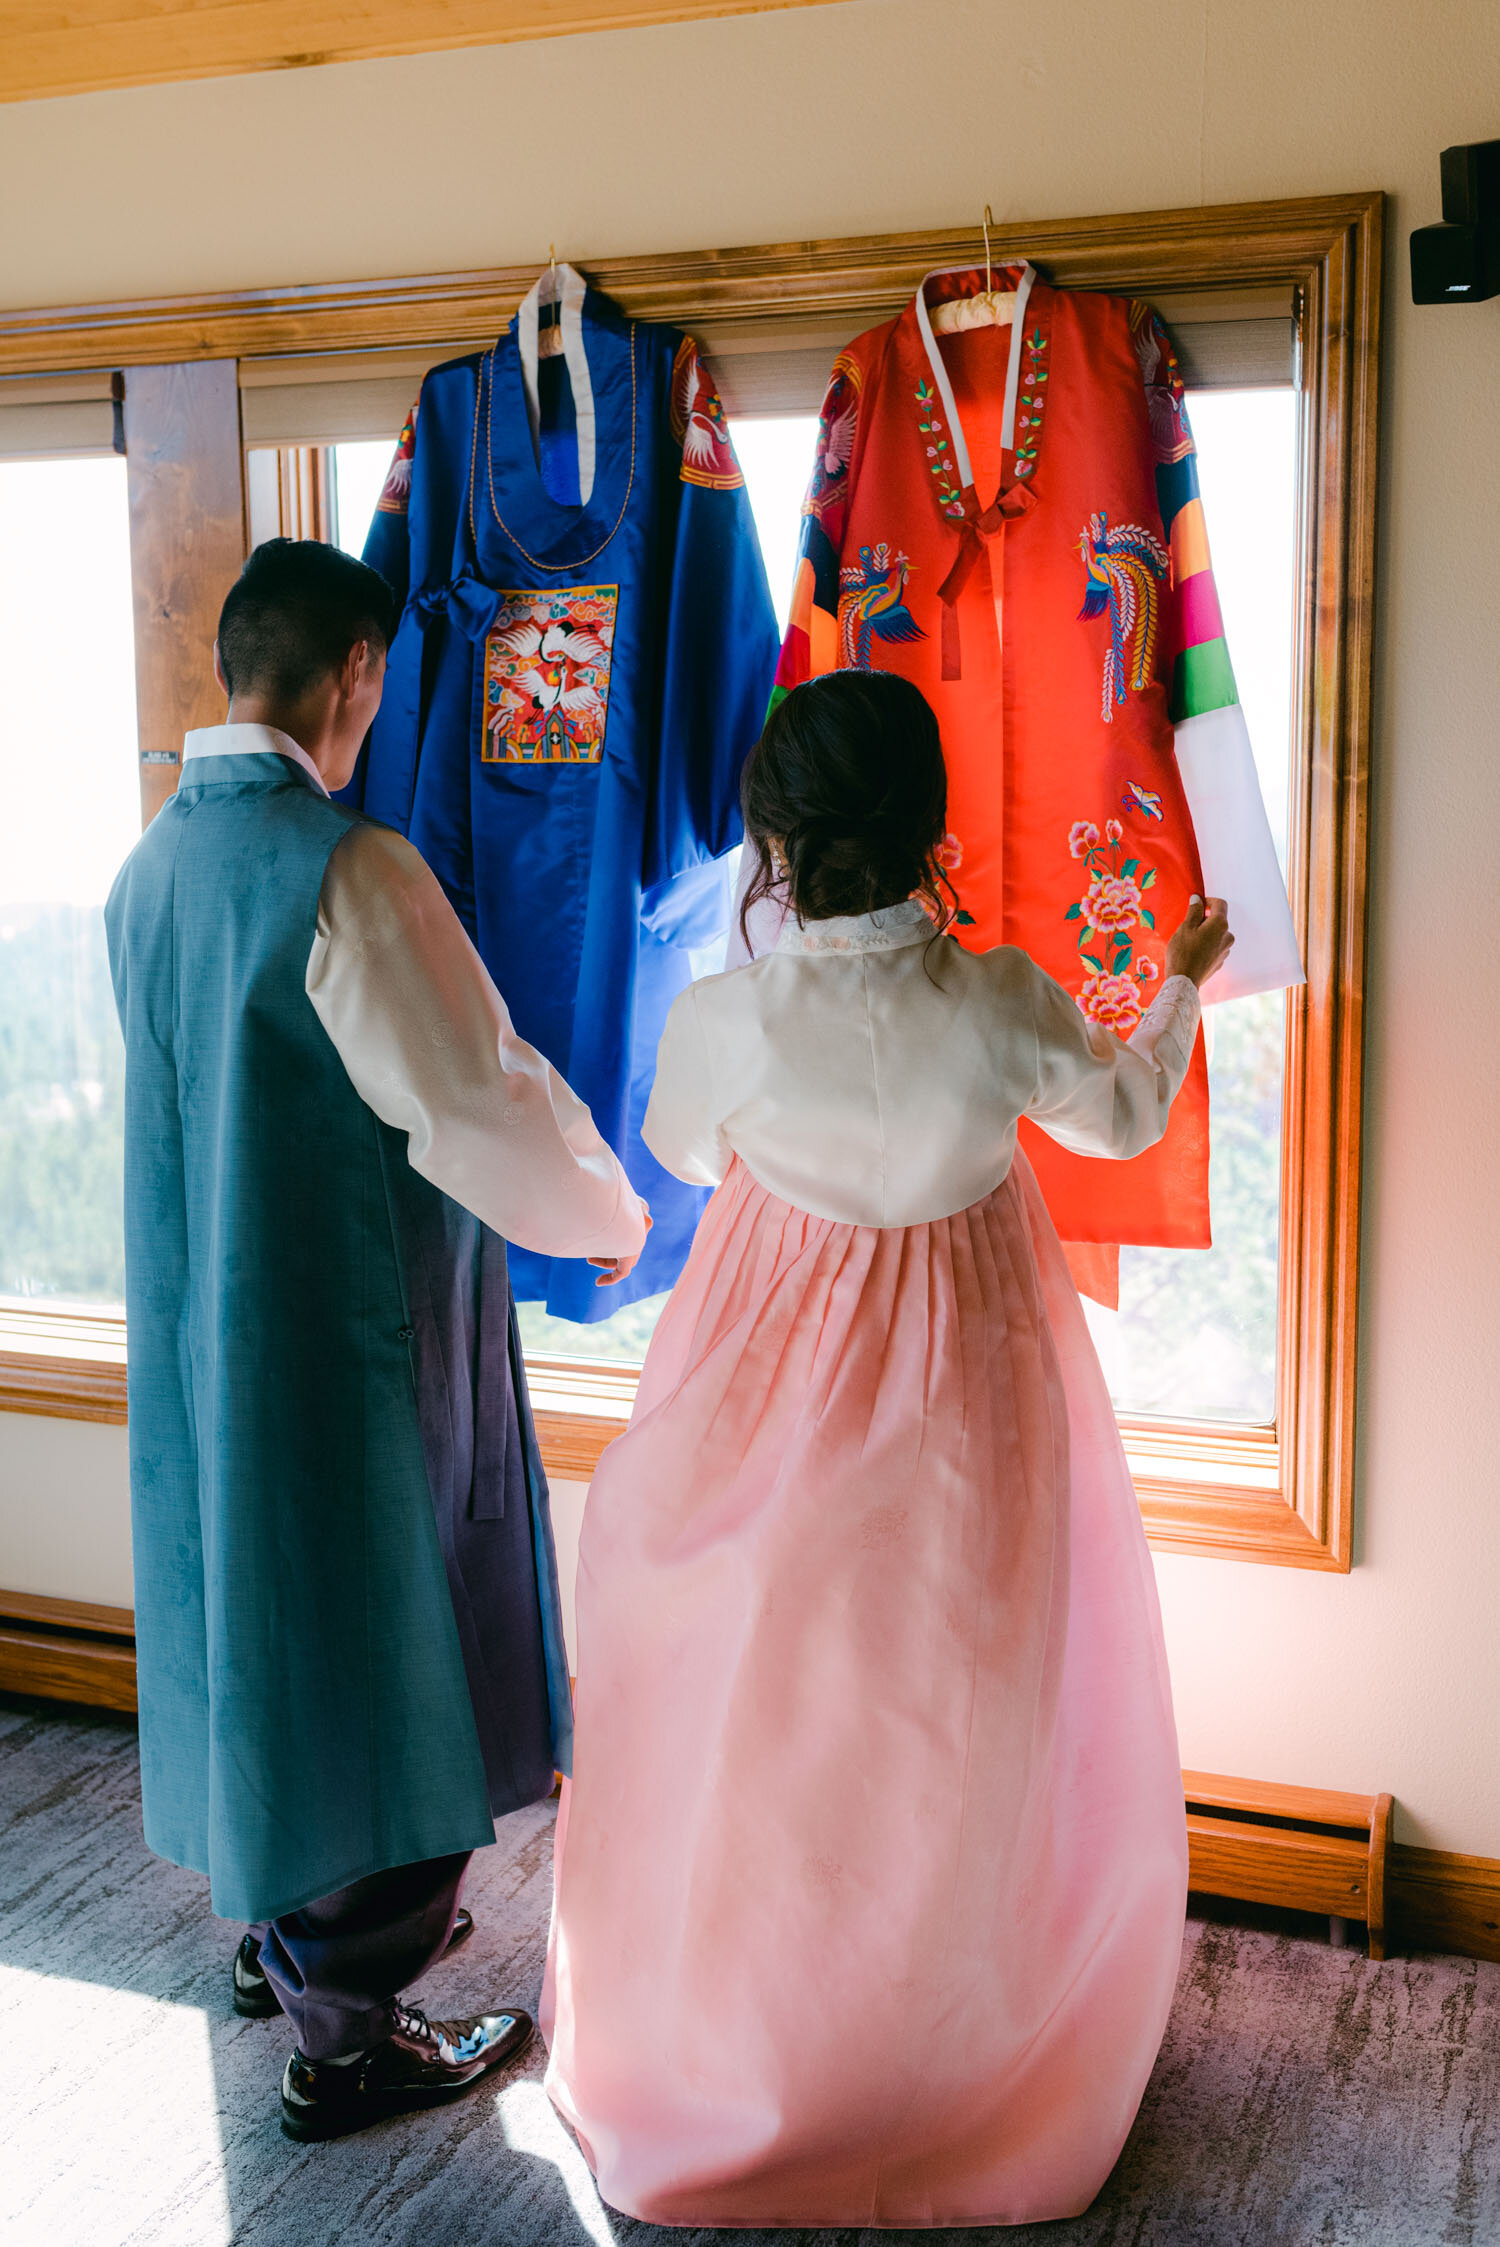 Tahoe Blue Estate Wedding, photo of the wedding couple getting ready for the Korean and Chinese ceremony 